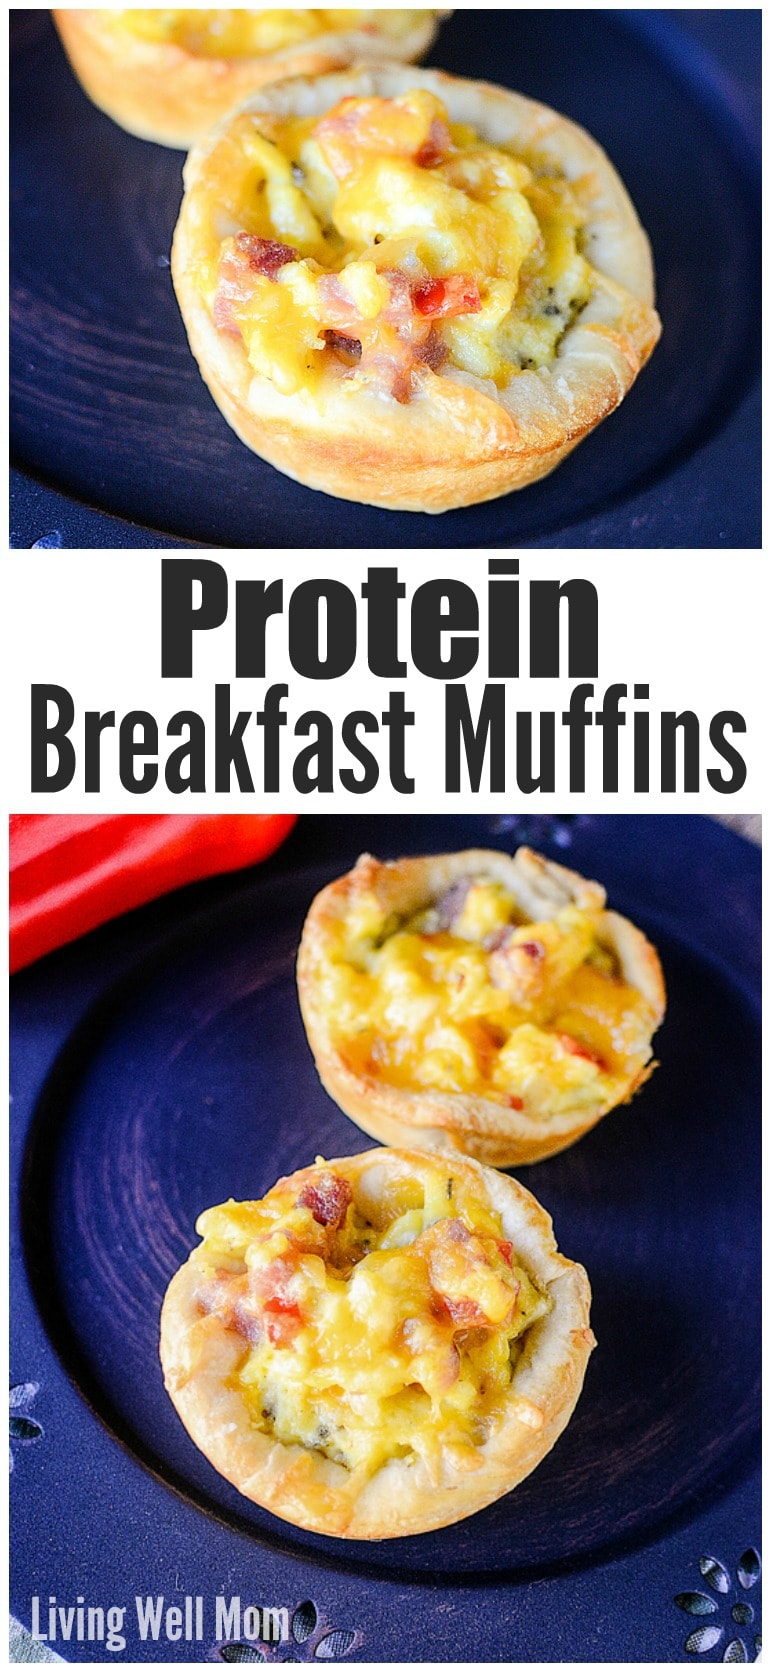 Here’s a tasty on-the-go recipe for a hearty breakfast - Protein Breakfast Muffins! They’re both adult and kid-approved and are great for making ahead and freezing too! 